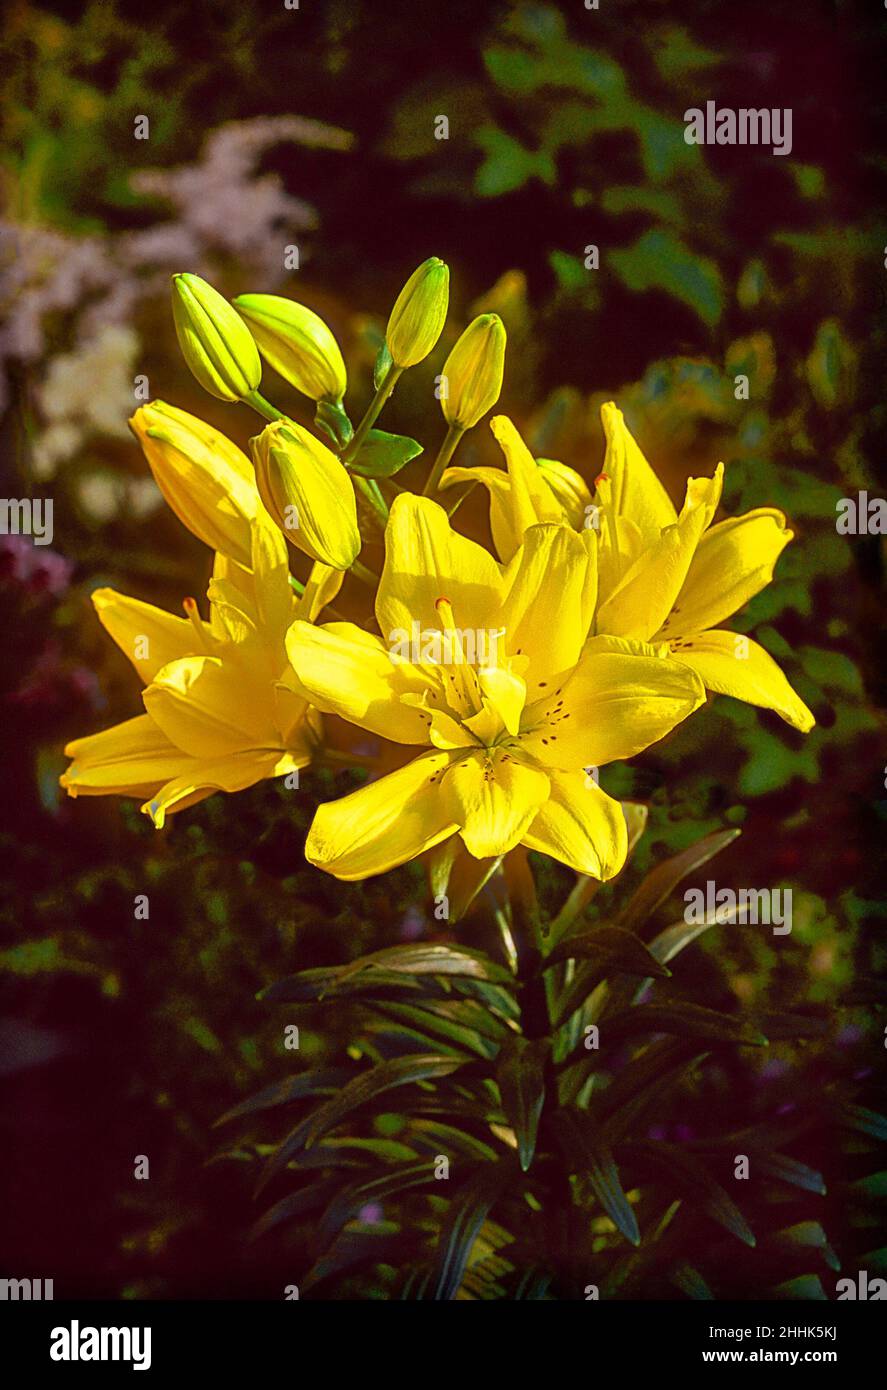 Close up of Lily Fata Morgana. Several yellow flowers and buds against a foliage background. A Div 1 Asiatic Hybrid lily with upward-facing flowers. Stock Photo